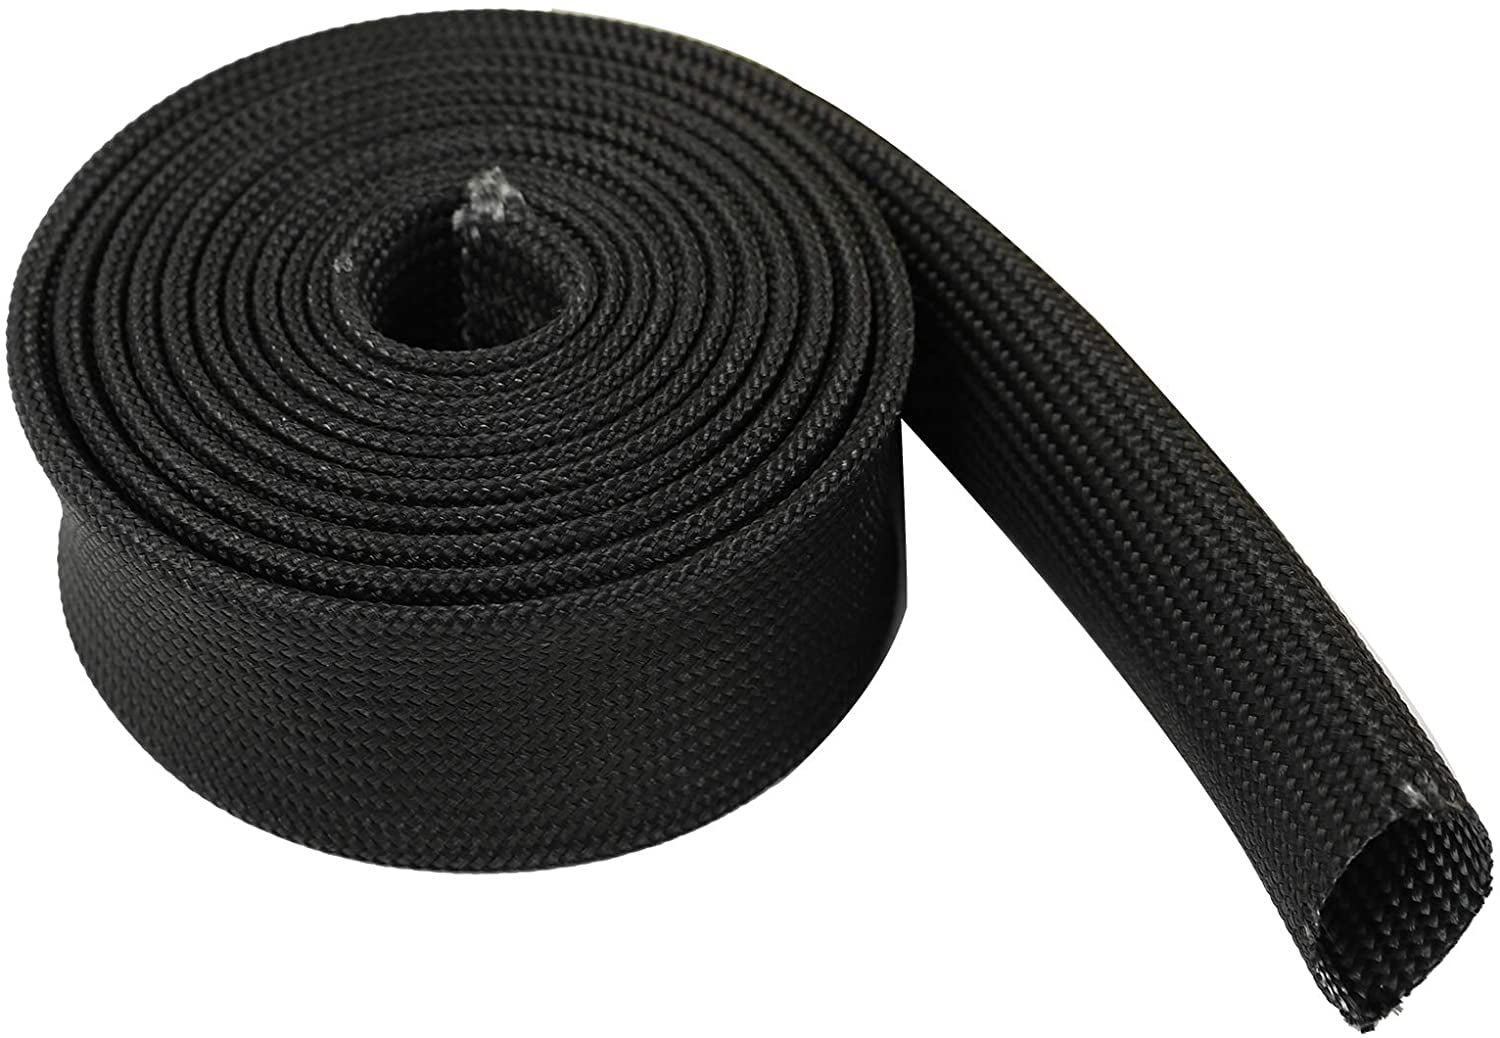 Black Heat-Shielded Fire Sleeve for Oil Fuel Lines & Electrical Wiring 20mm X 1-Ft 